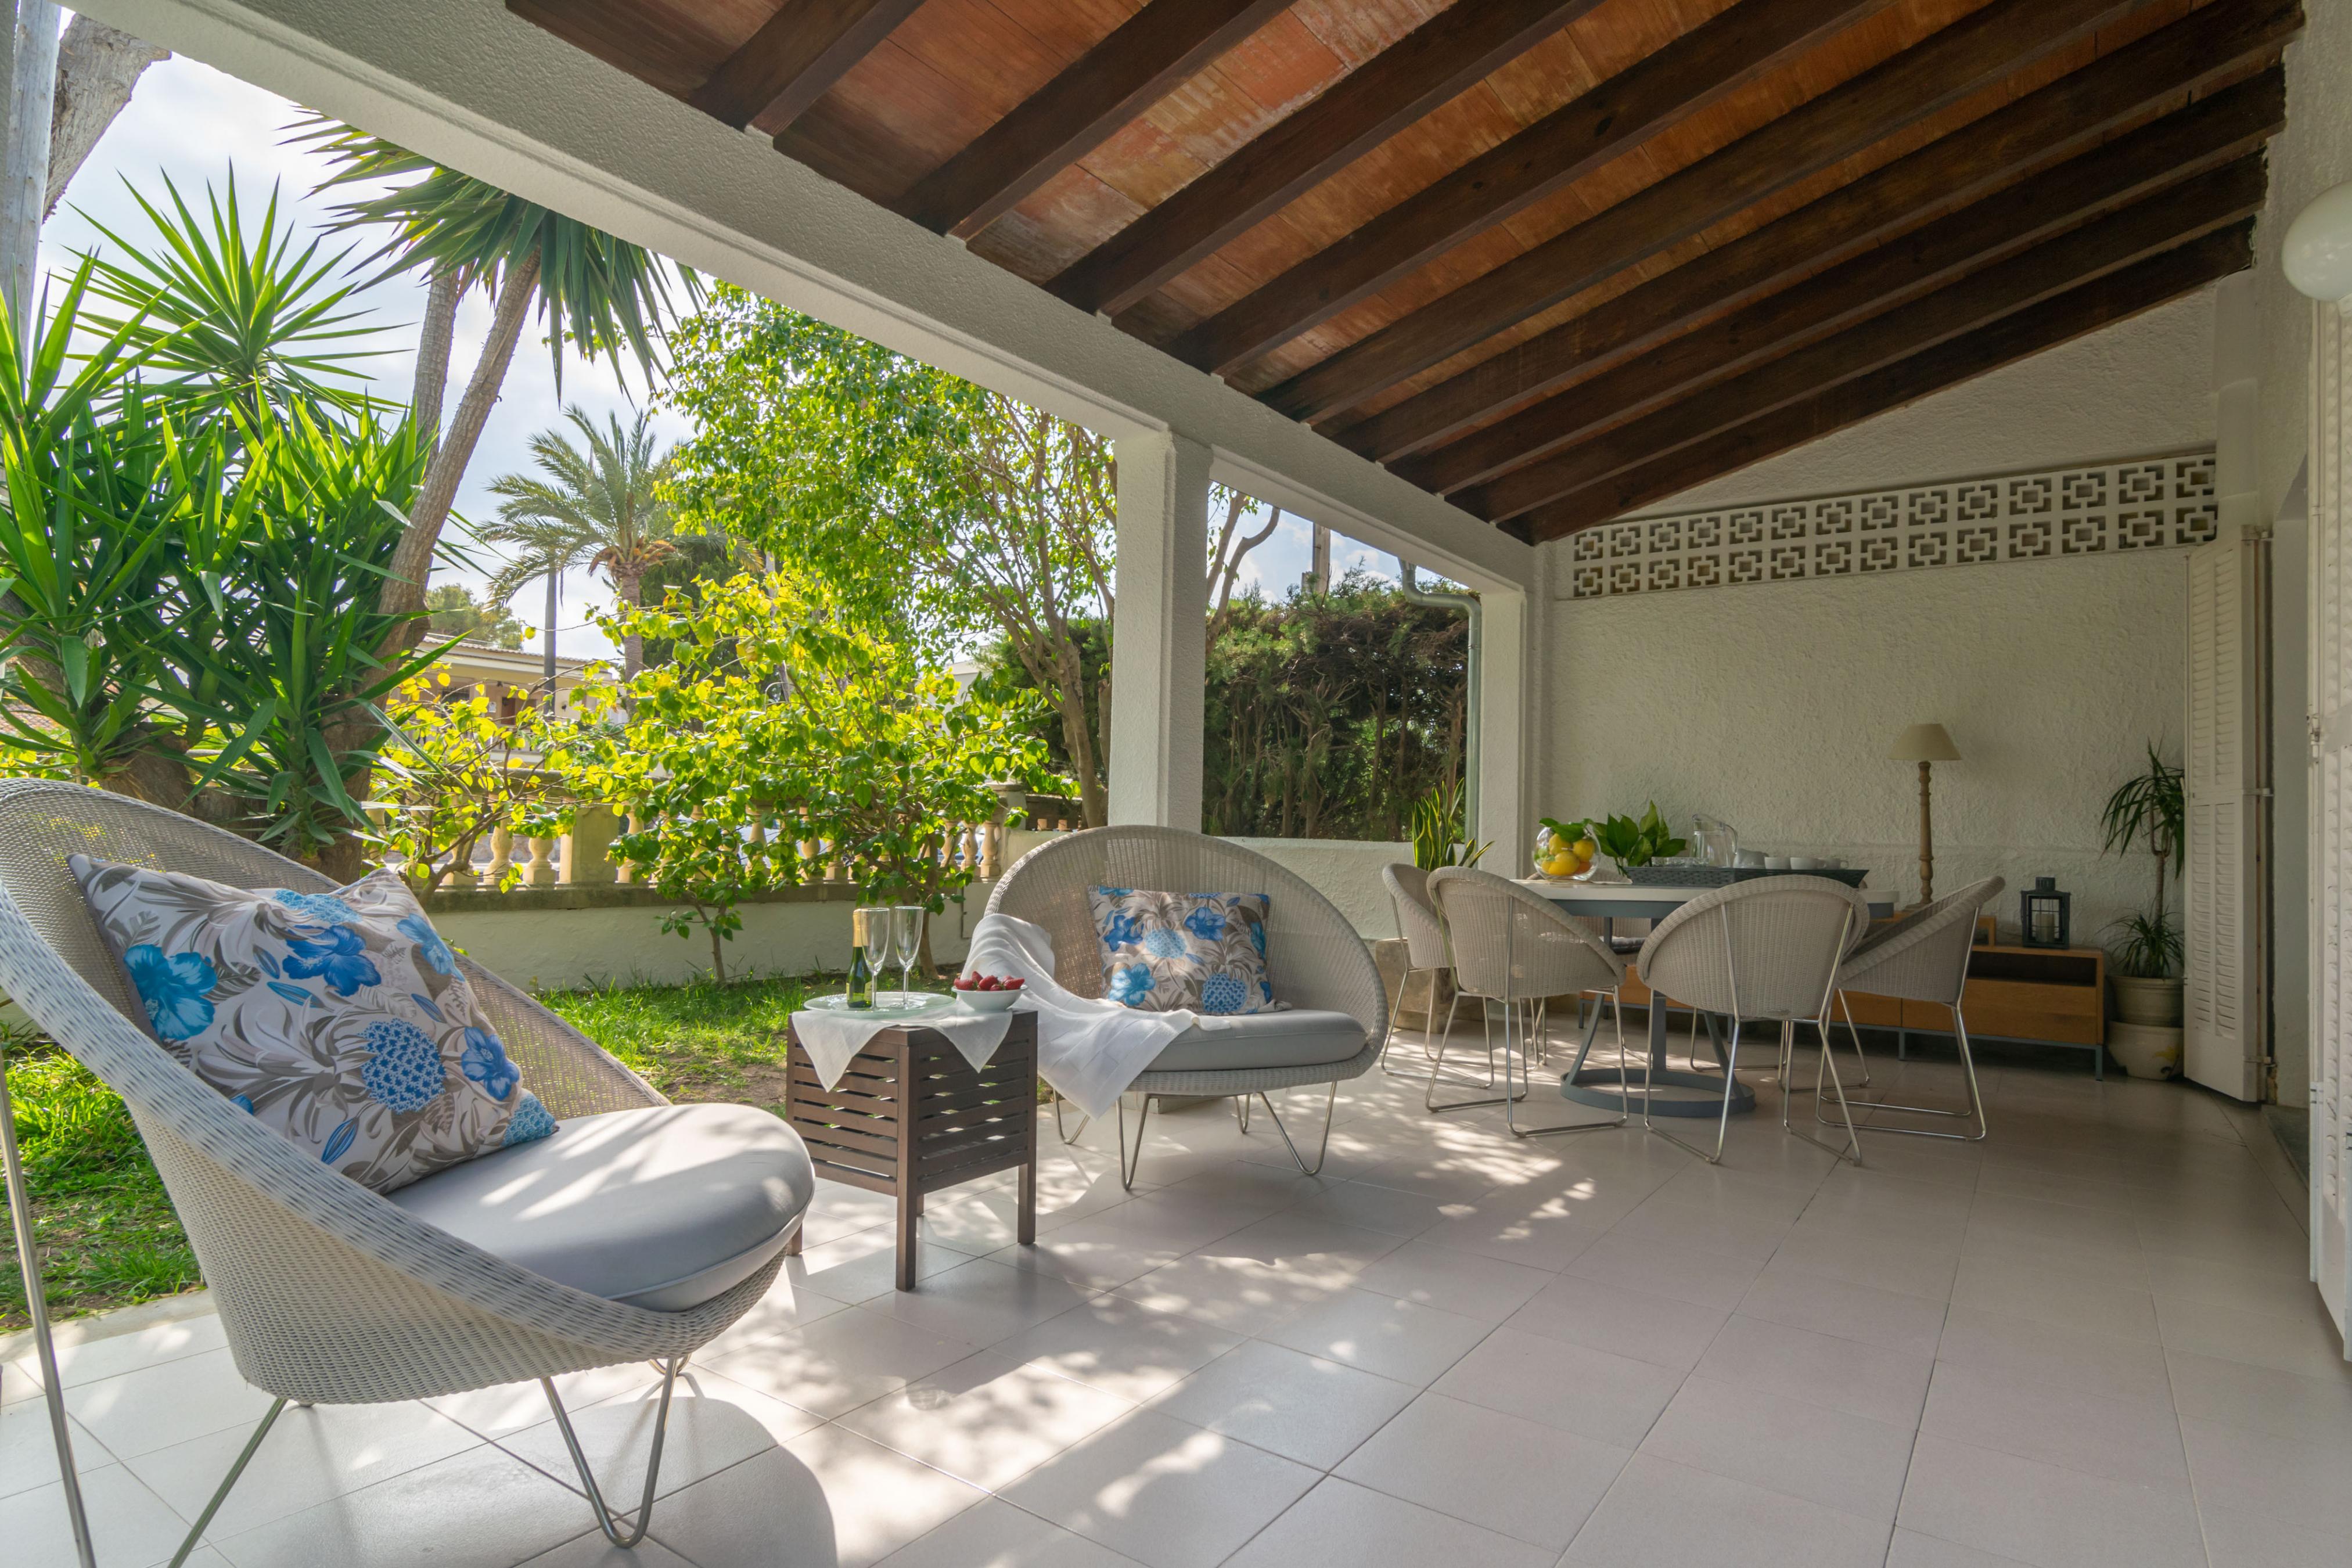 Property Image 1 - VILLA CAMPINS - Coquettish chalet with airy terraces and near the beach. Free WiFi